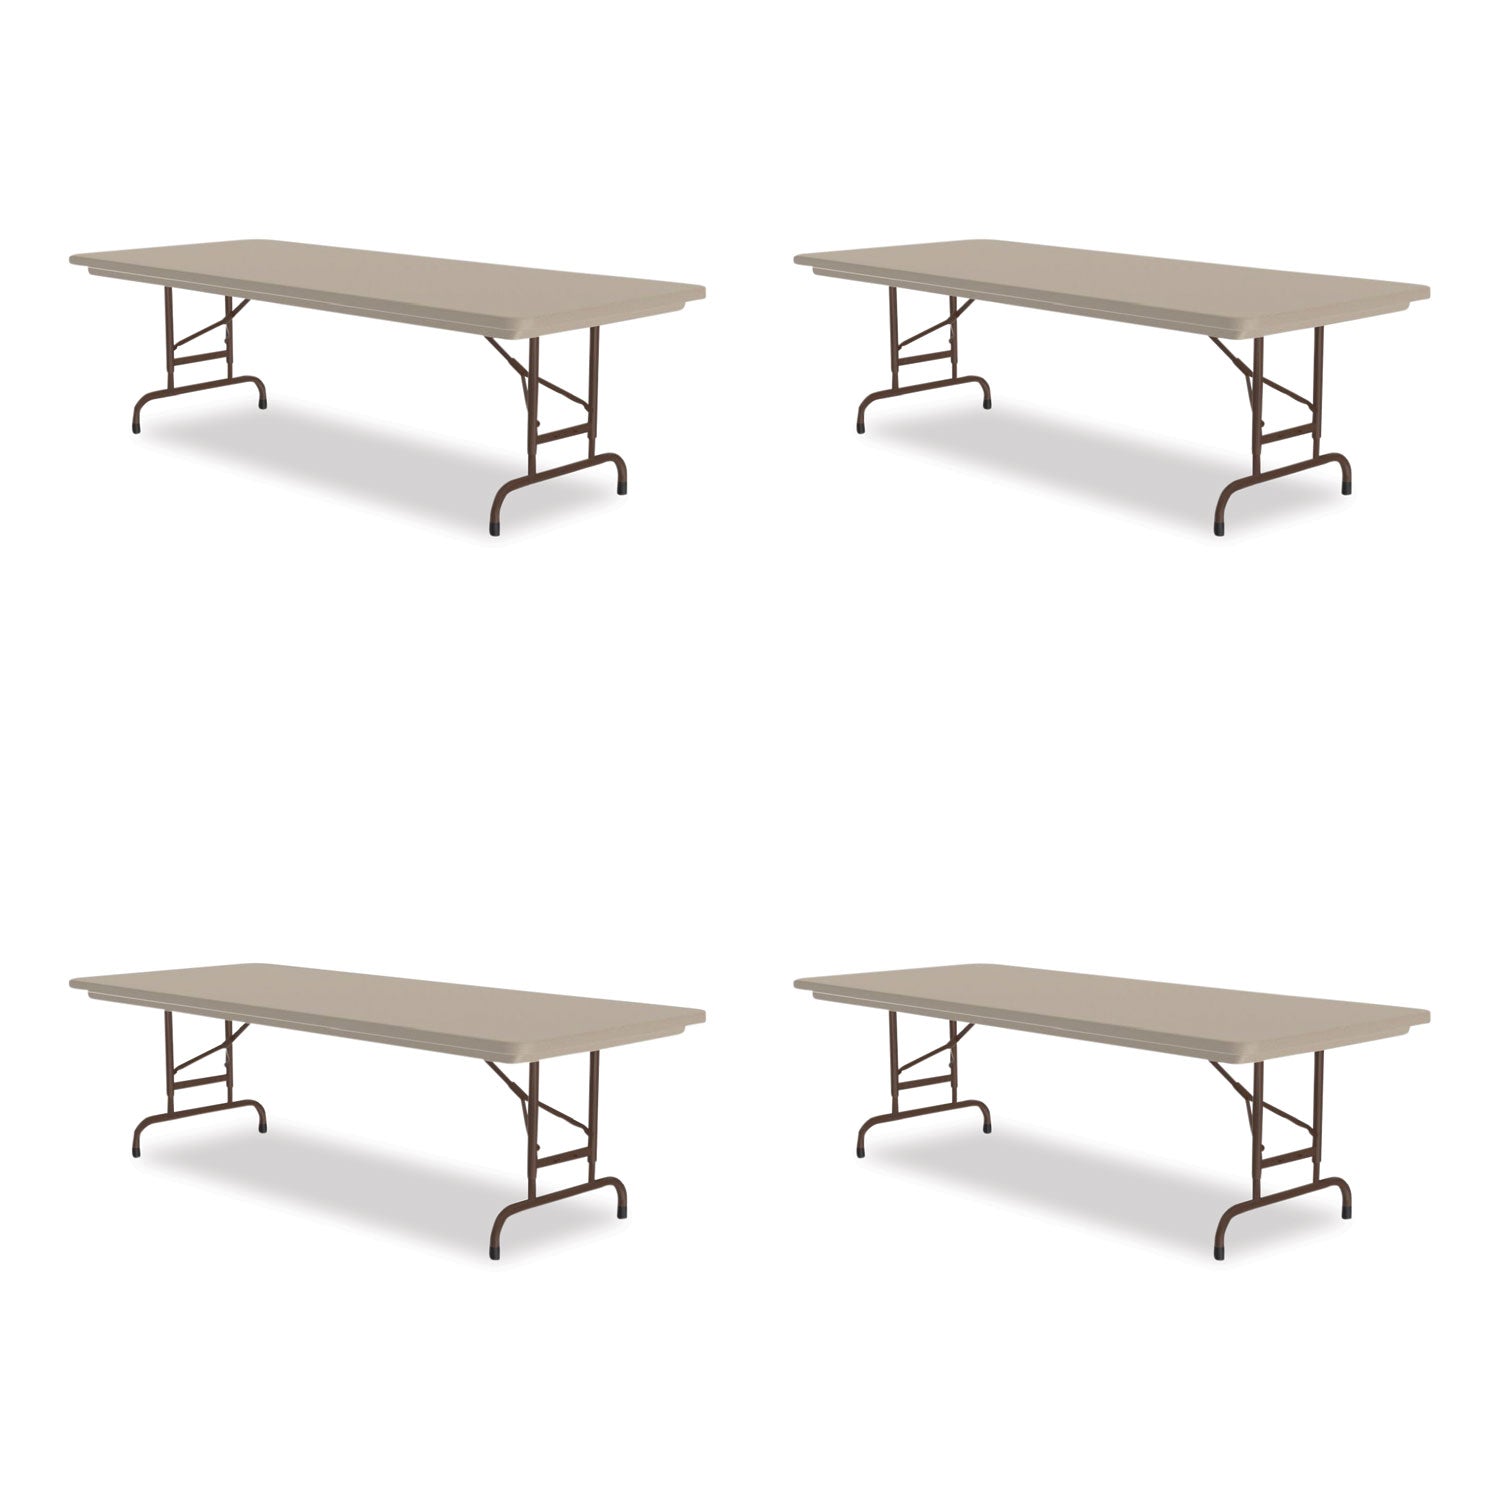 adjustable-folding-tables-rectangular-72-x-30-x-22-to-32-mocha-top-brown-legs-4-pallet-ships-in-4-6-business-days_crlra3072244p - 1